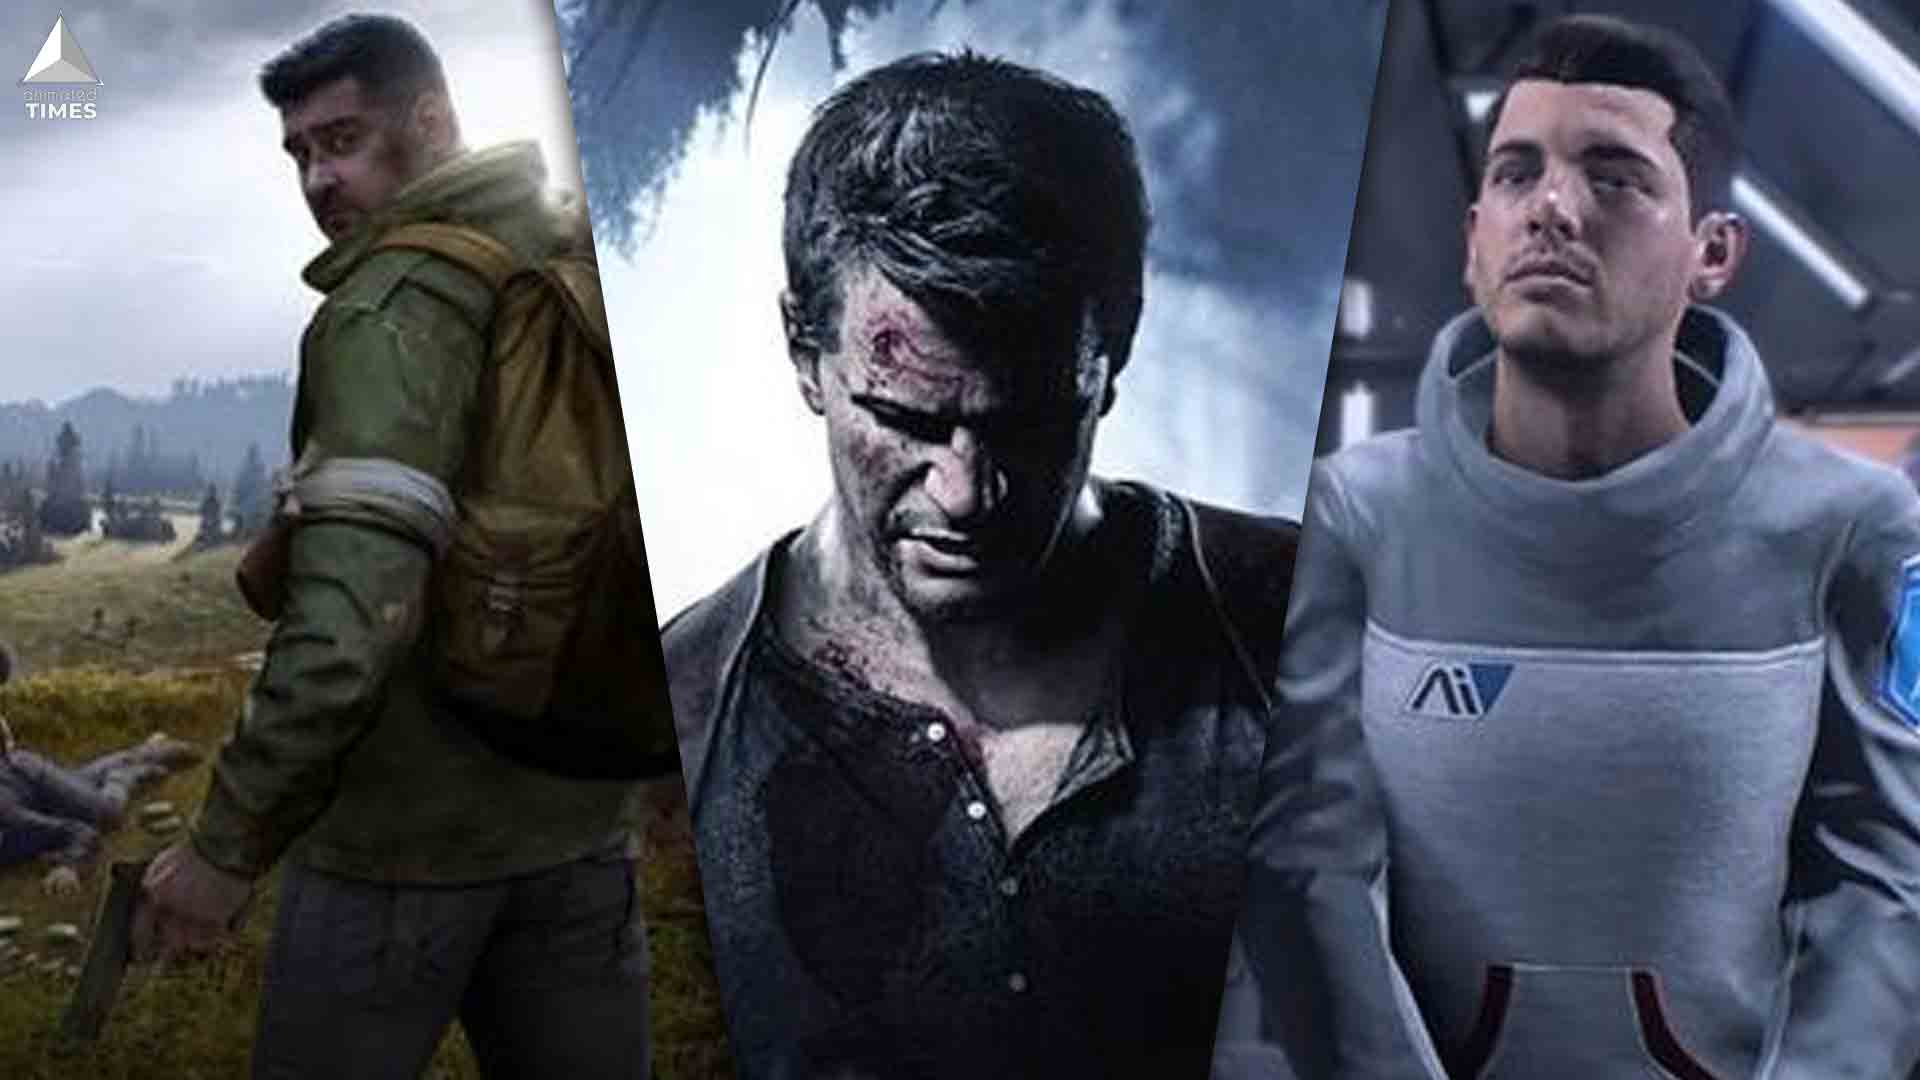 10 PS4 Games That Have Already Aged Very Badly